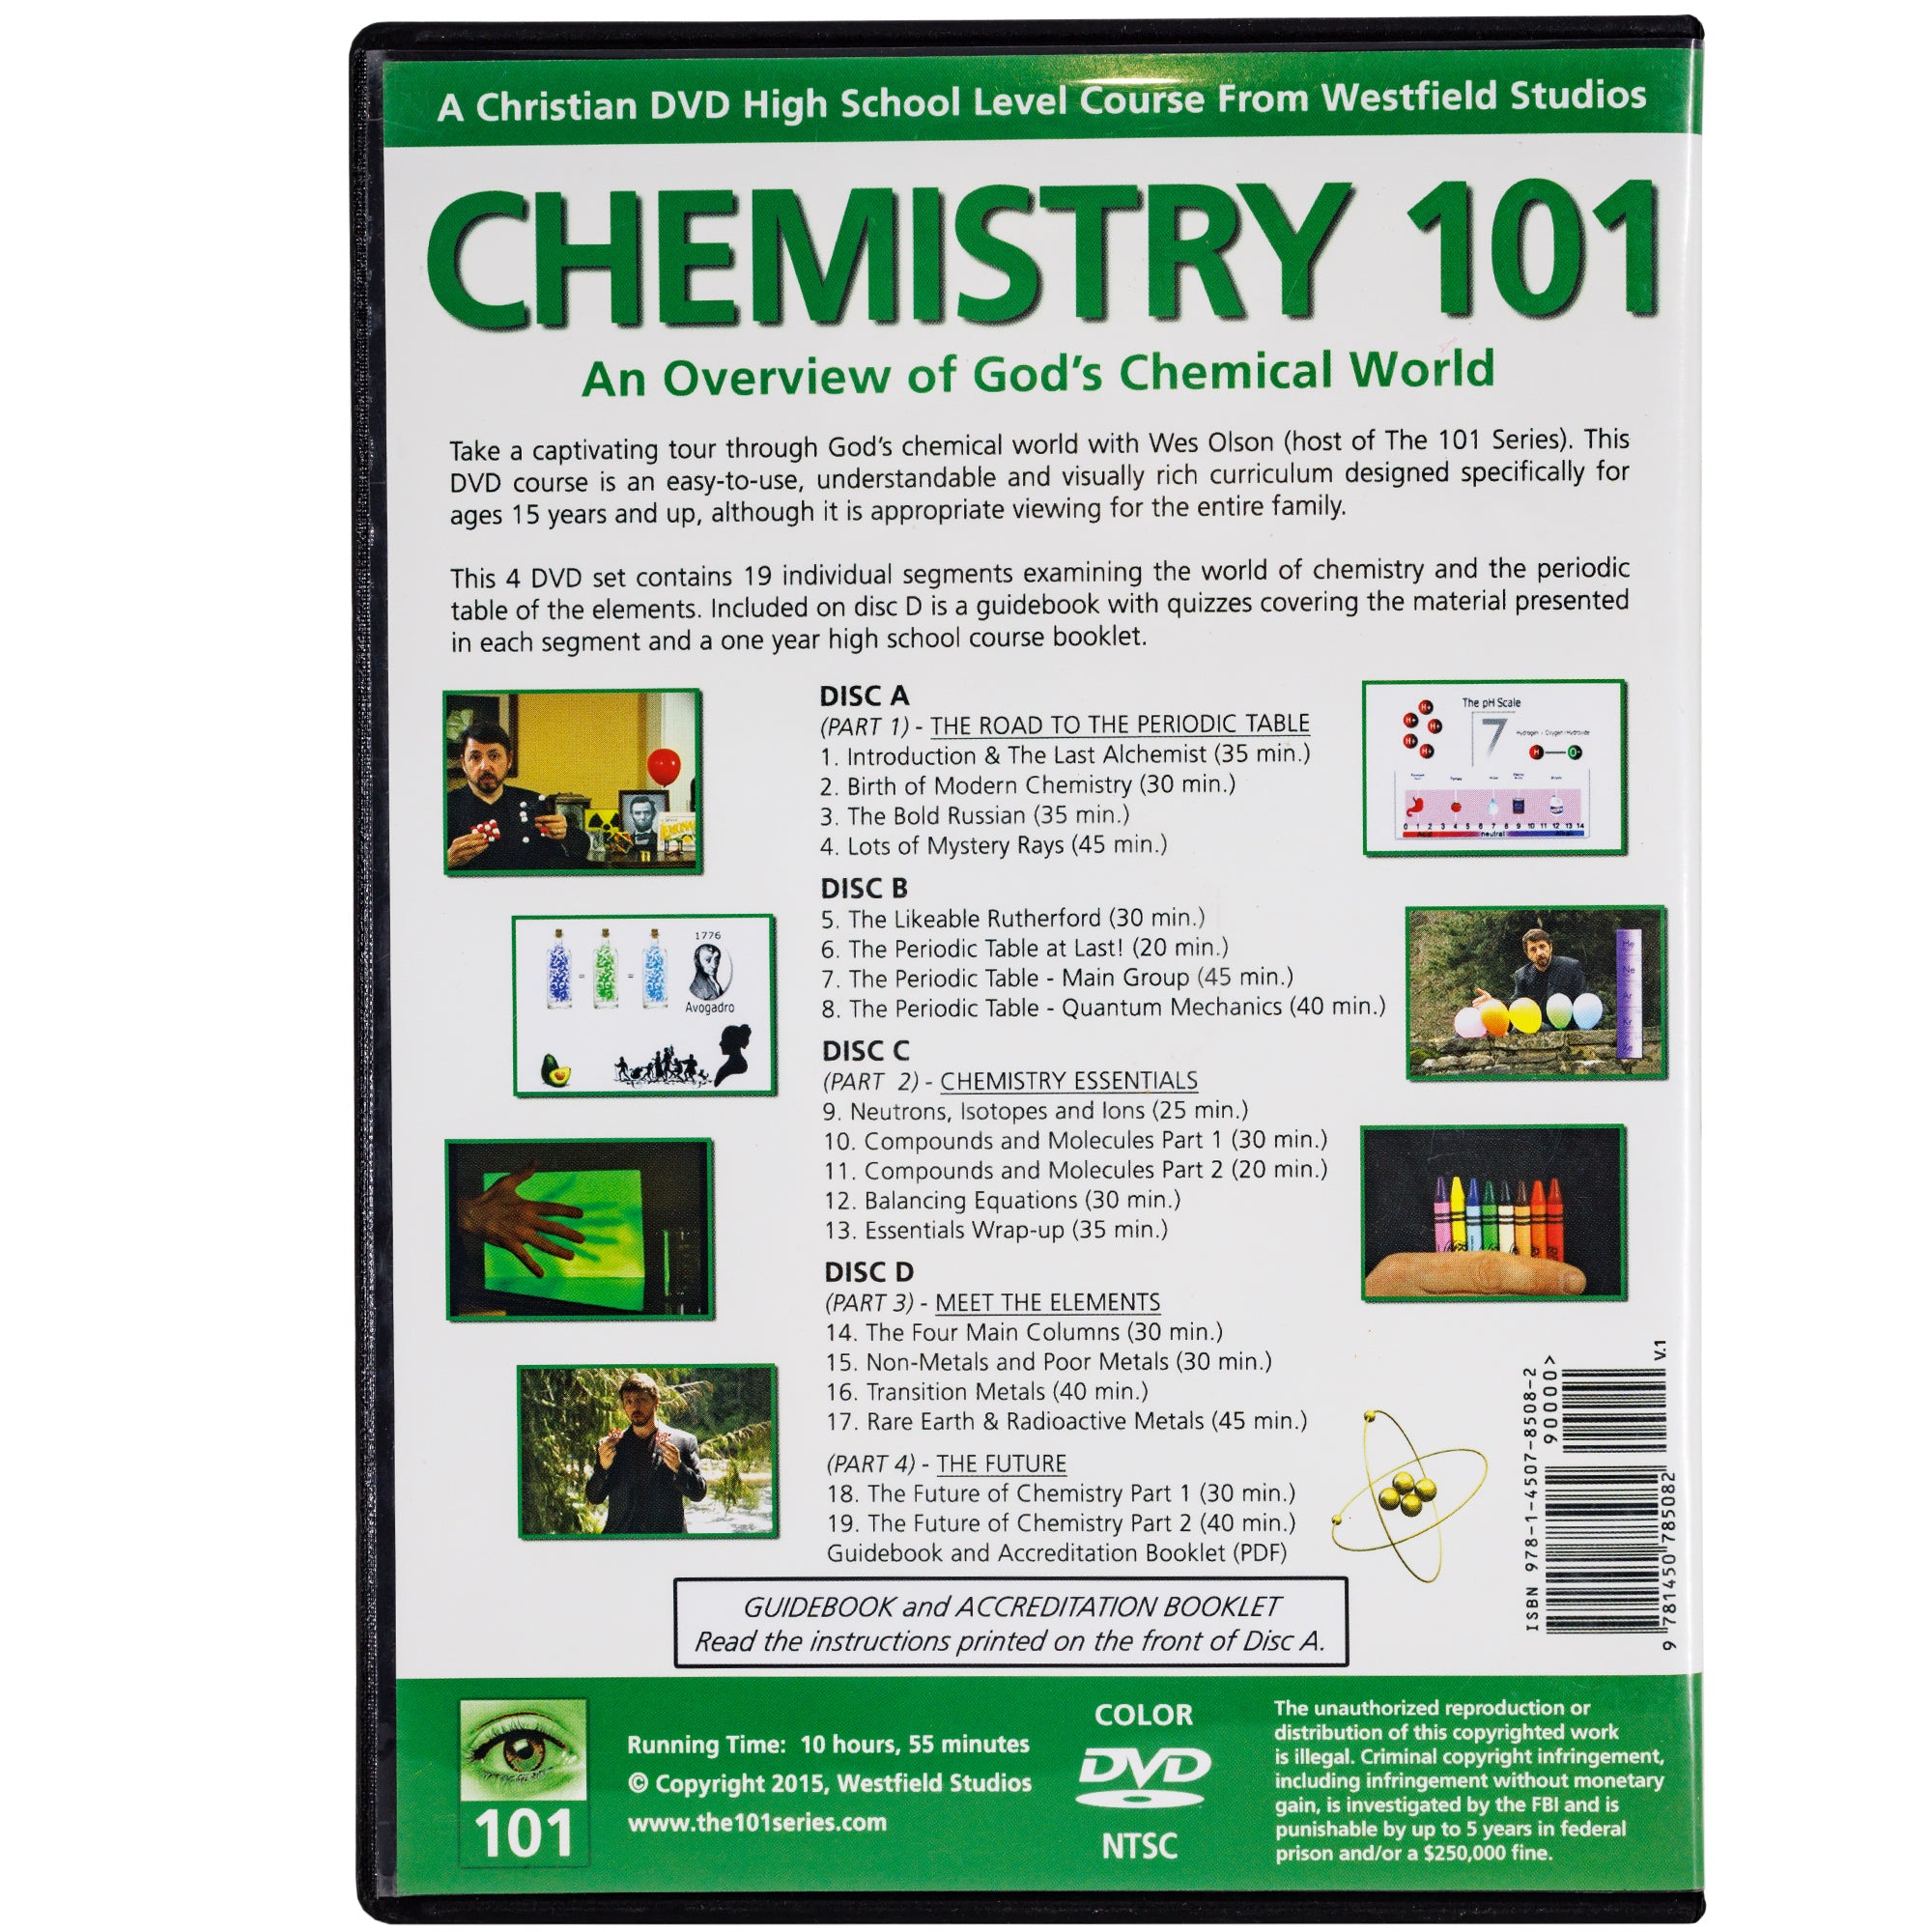 The Chemistry 101 DVD case back. It is light gray with green borders on the top and bottom. There are 7 images on either side of black text, including; a man holding science manipulatives, an image that shows 3 glass bottles and illustrated images, a mans hand in front of a green glowing screen, an illustrations showing a PH scale, a man standing in front of 5 colored balloons, and a hand holding 8 different colored crayons.